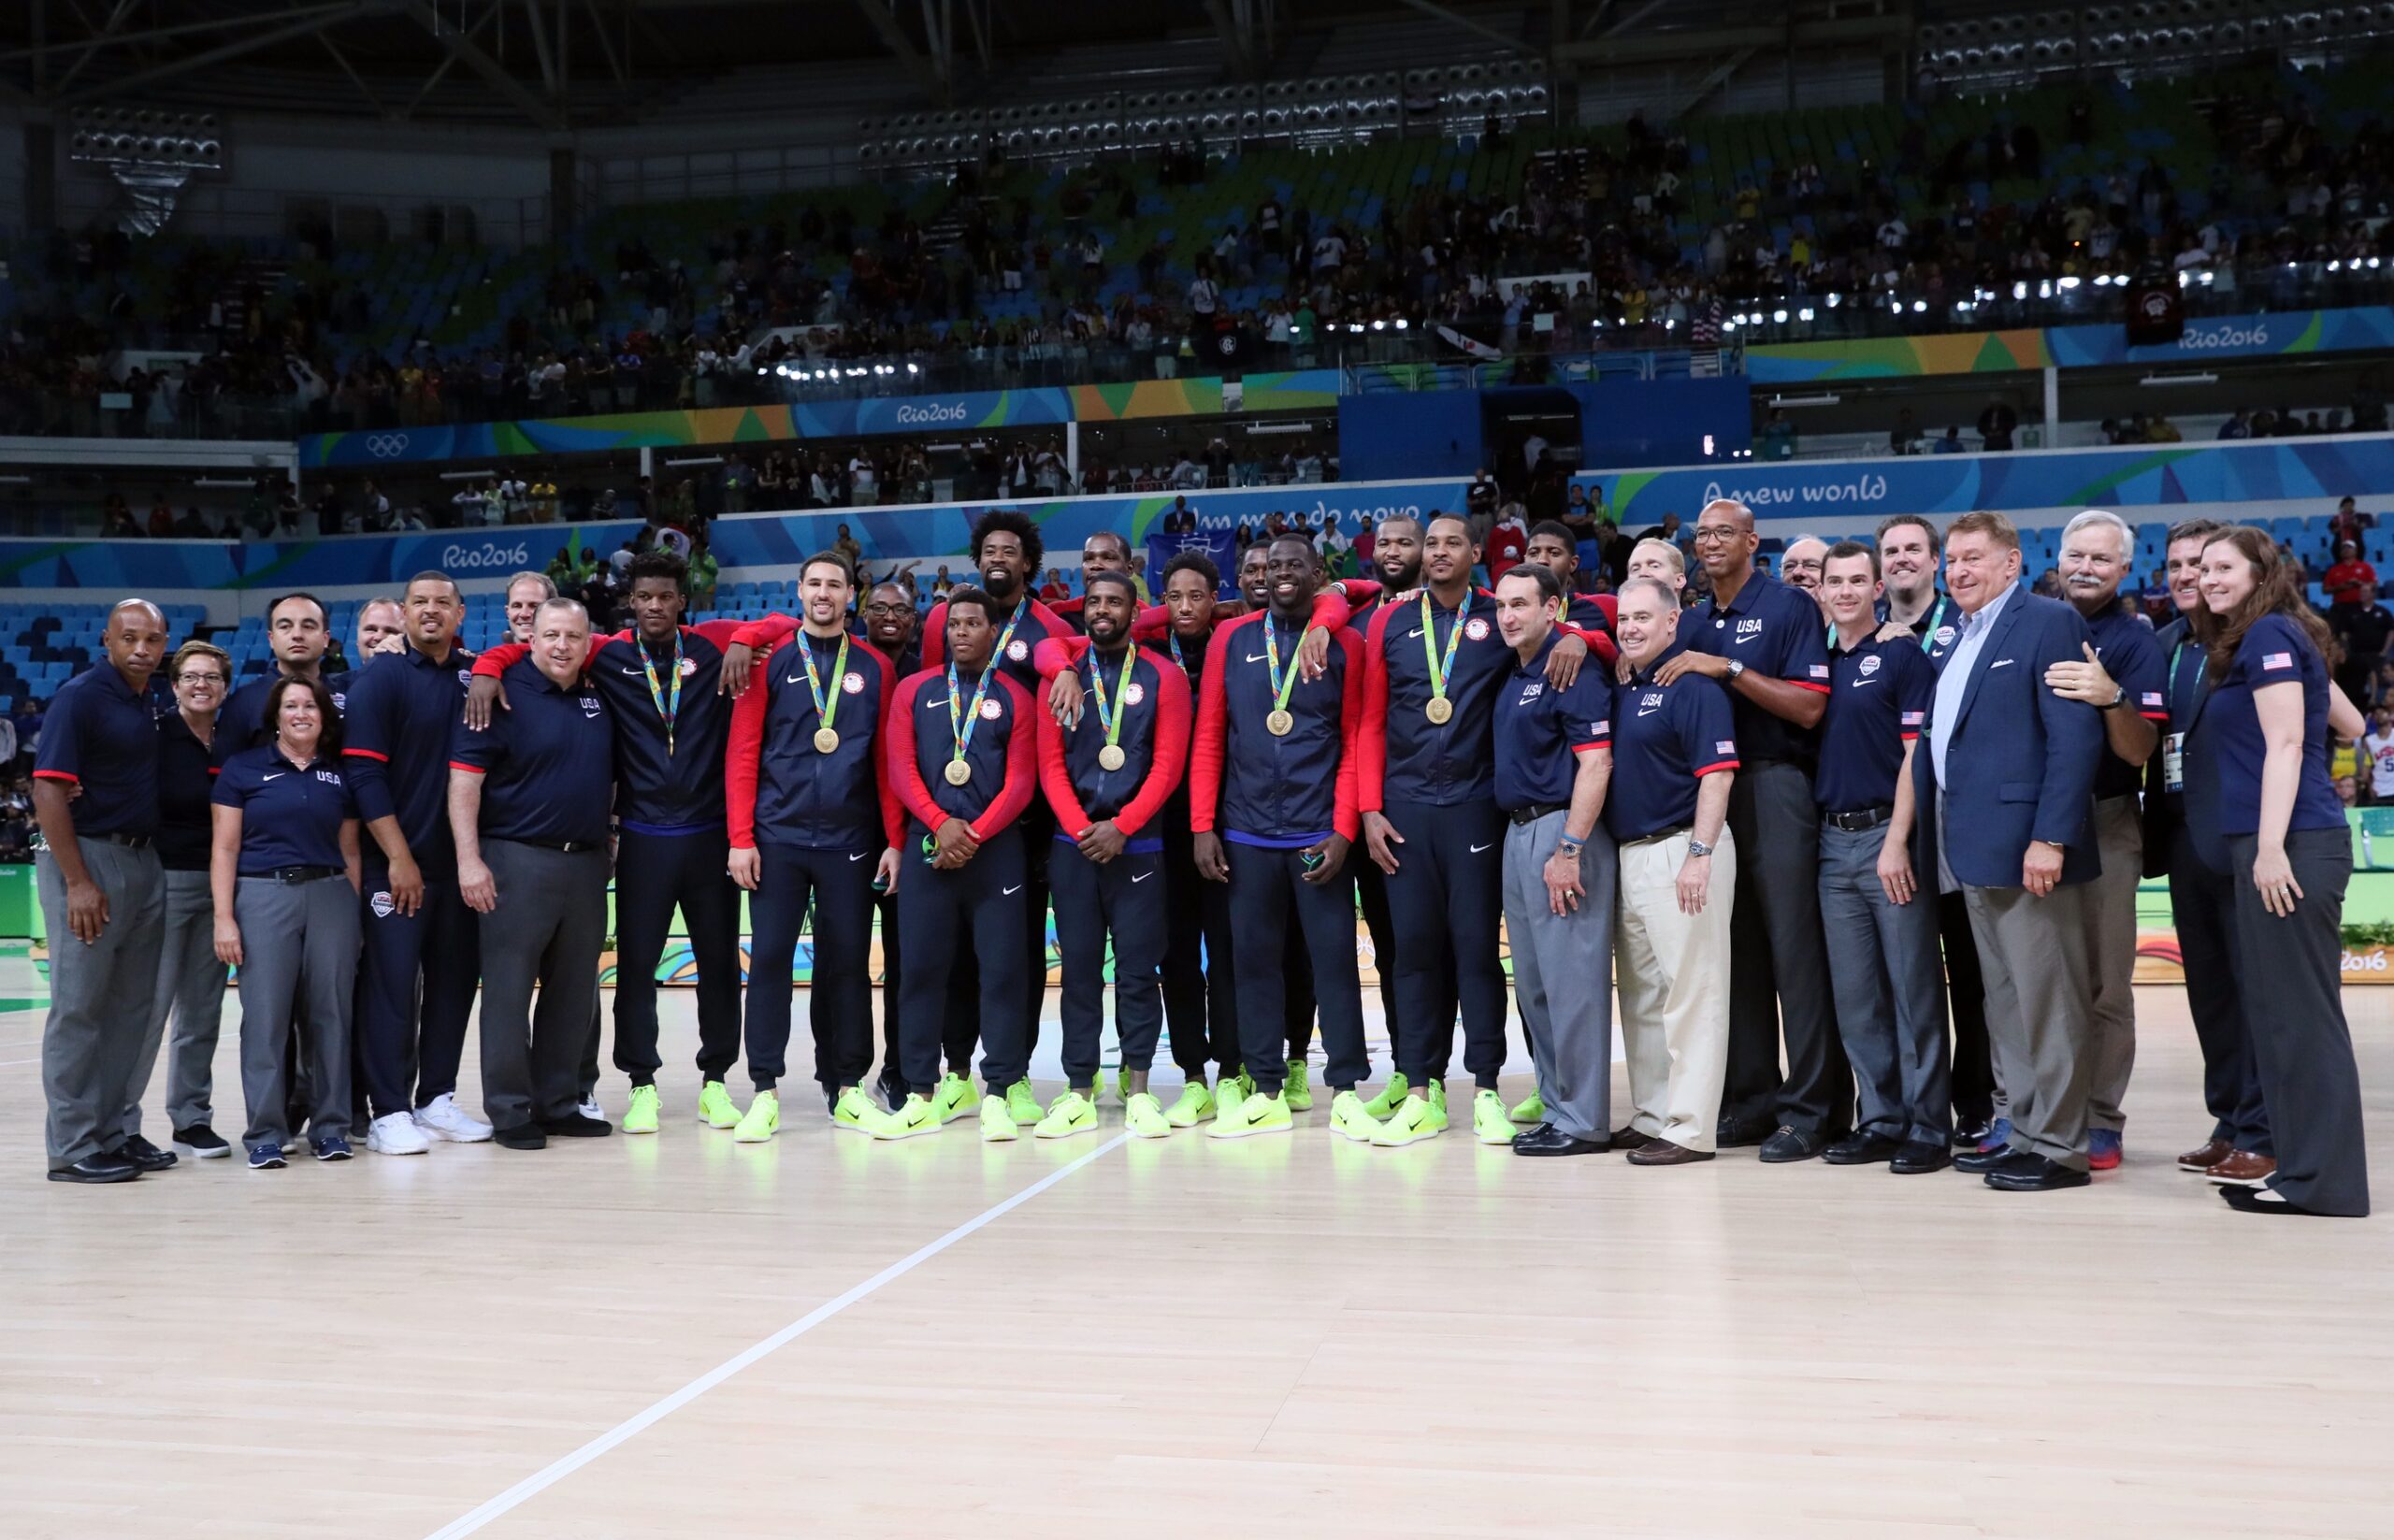 Aug 21, 2016; Rio de Janeiro, Brazil; USA basketball players and staff pose for a picture after winning the gold medal in the men's basketball gold medal match during the Rio 2016 Summer Olympic Games at Carioca Arena 1. Mandatory Credit: David E. Klutho-USA TODAY Sports